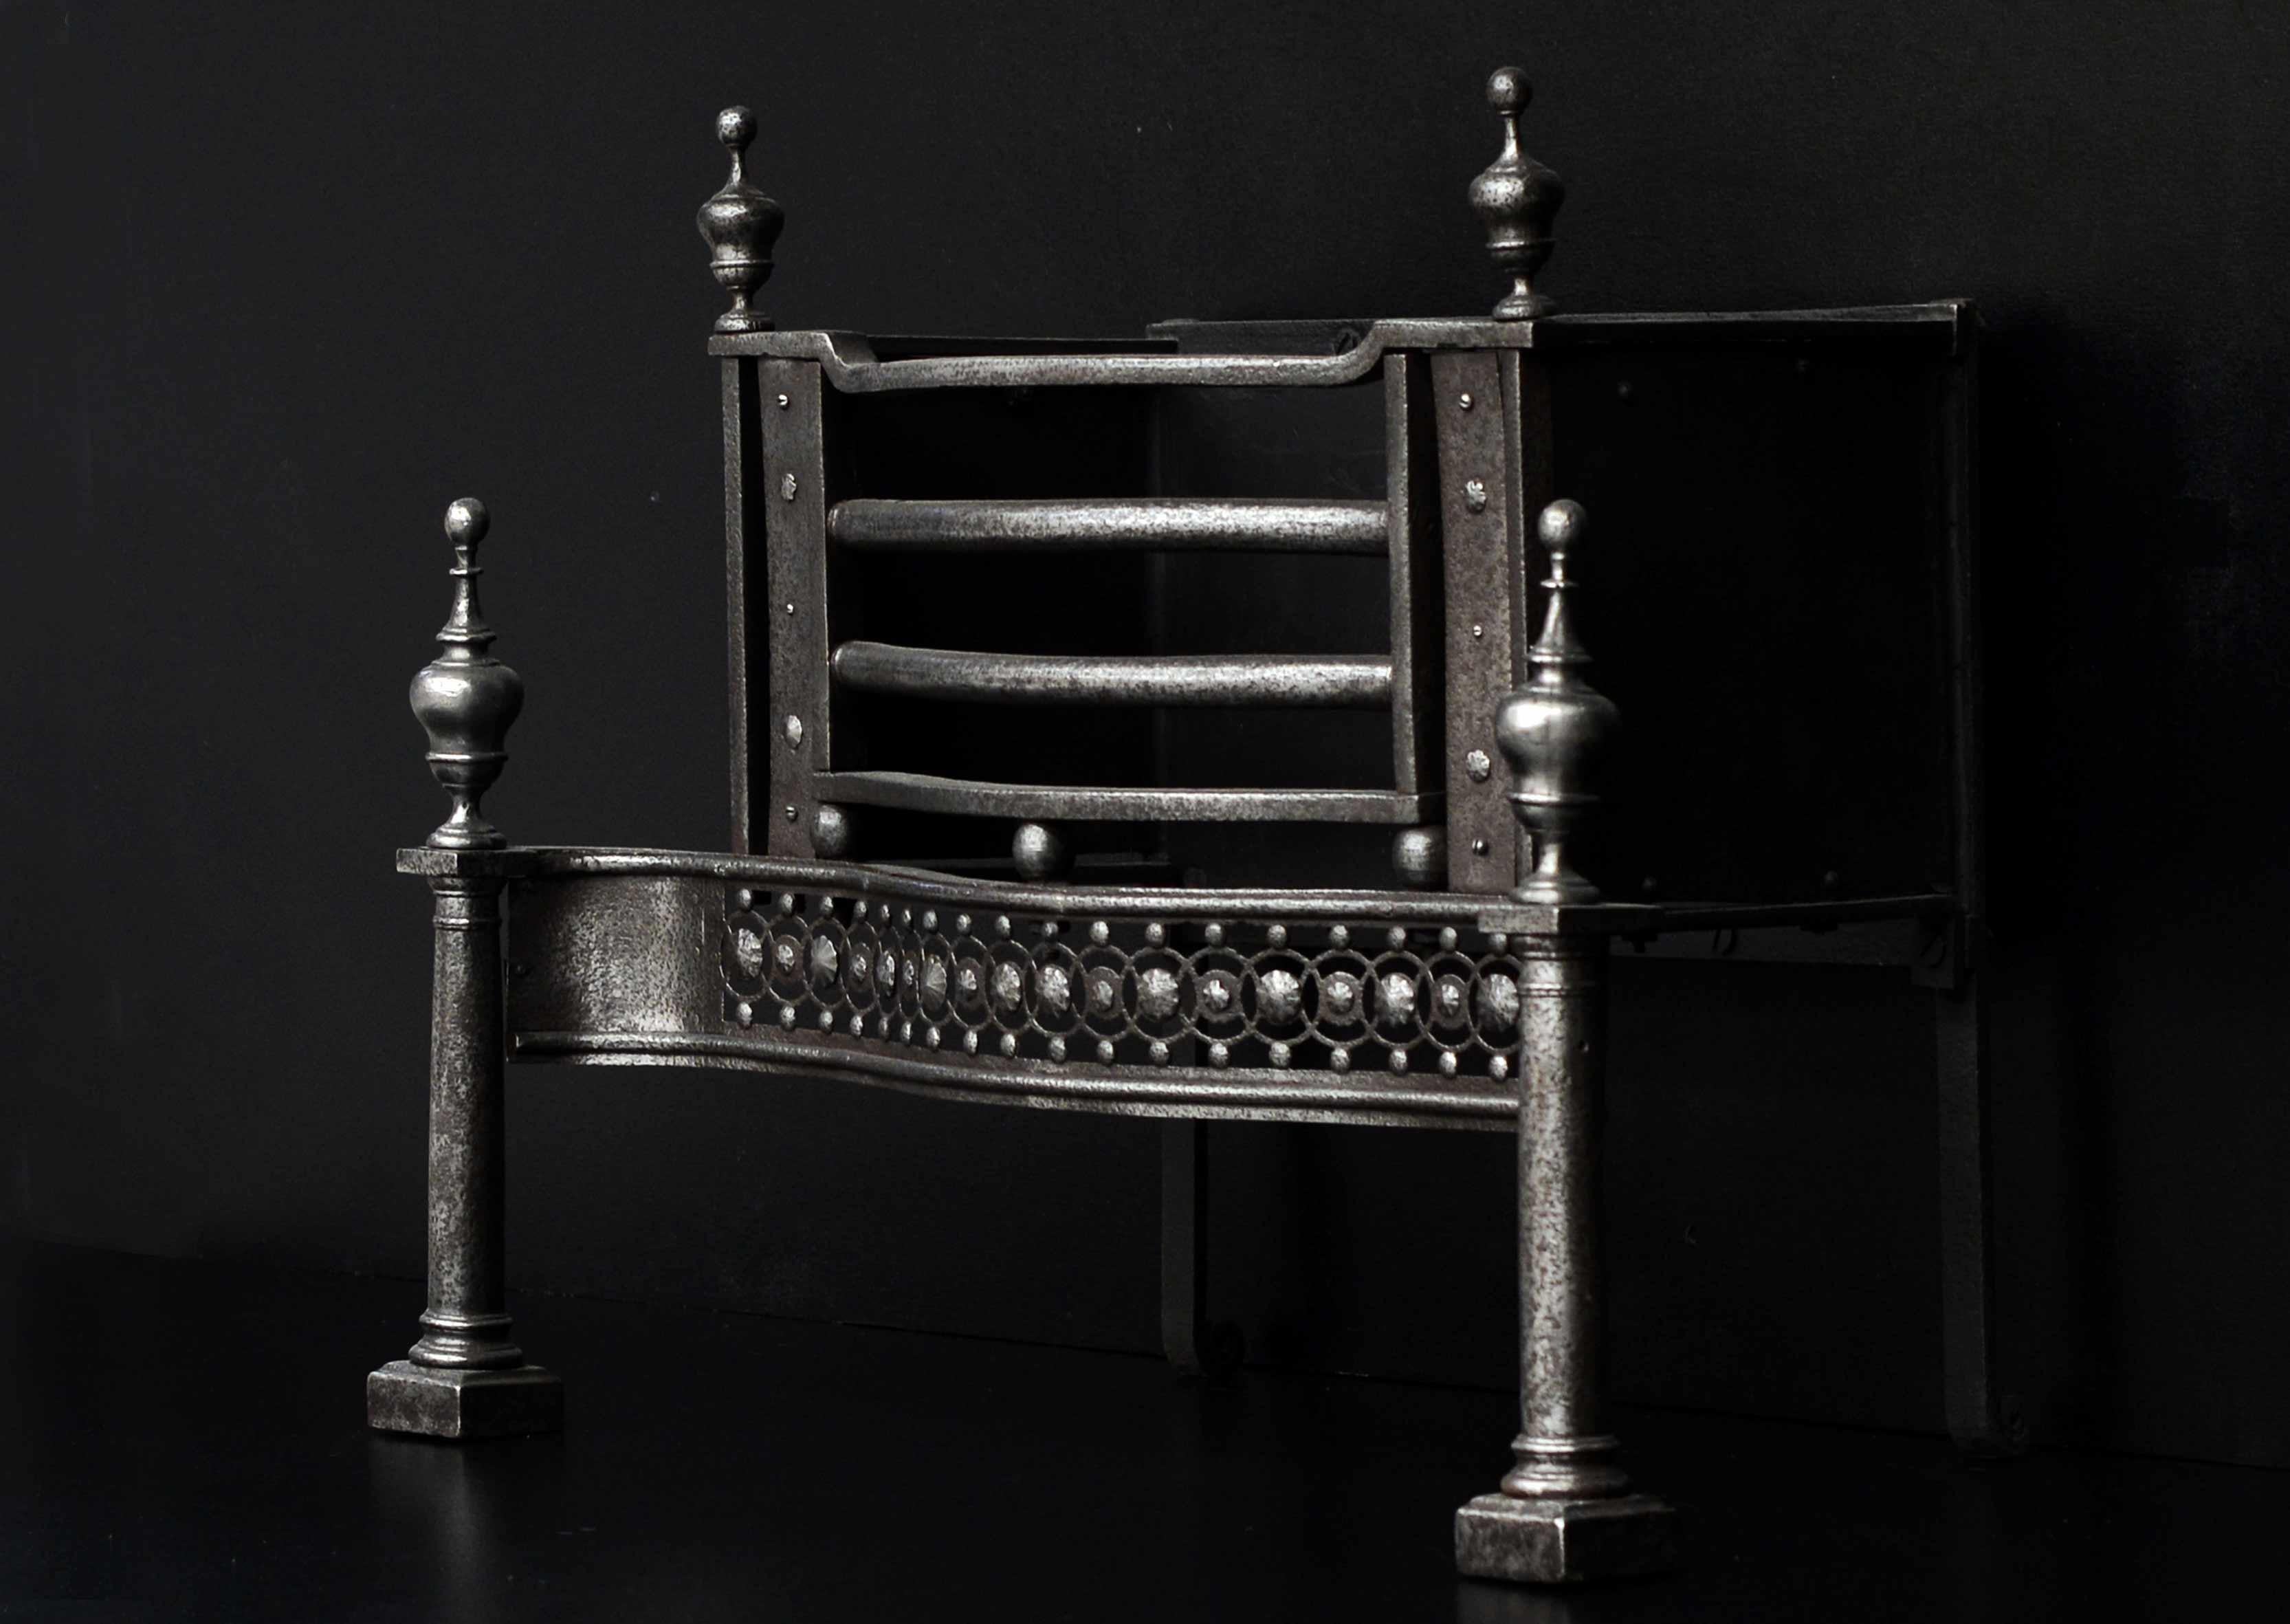 An English, mid 18th century polished steel firegrate. The pierced, guilloche fret with cut steel paterae and surmounted by shaped front bars above. The cylindrical legs surmounted by urn finials and shaped top bar. Wrought iron front panels and